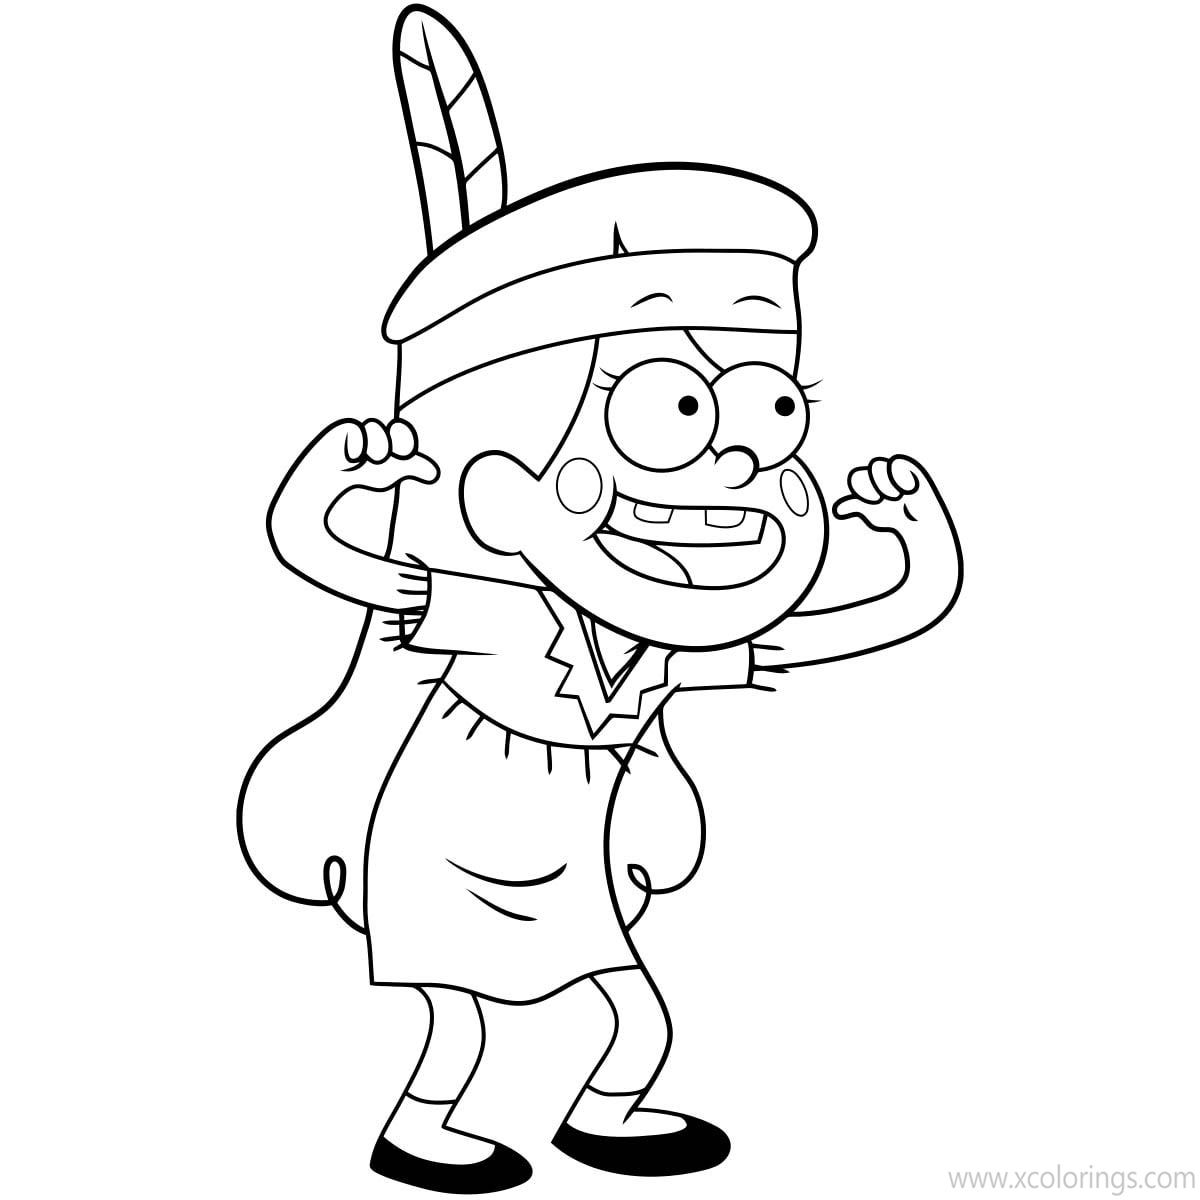 Free Gravity Falls Coloring Pages Mabel As An Indian printable